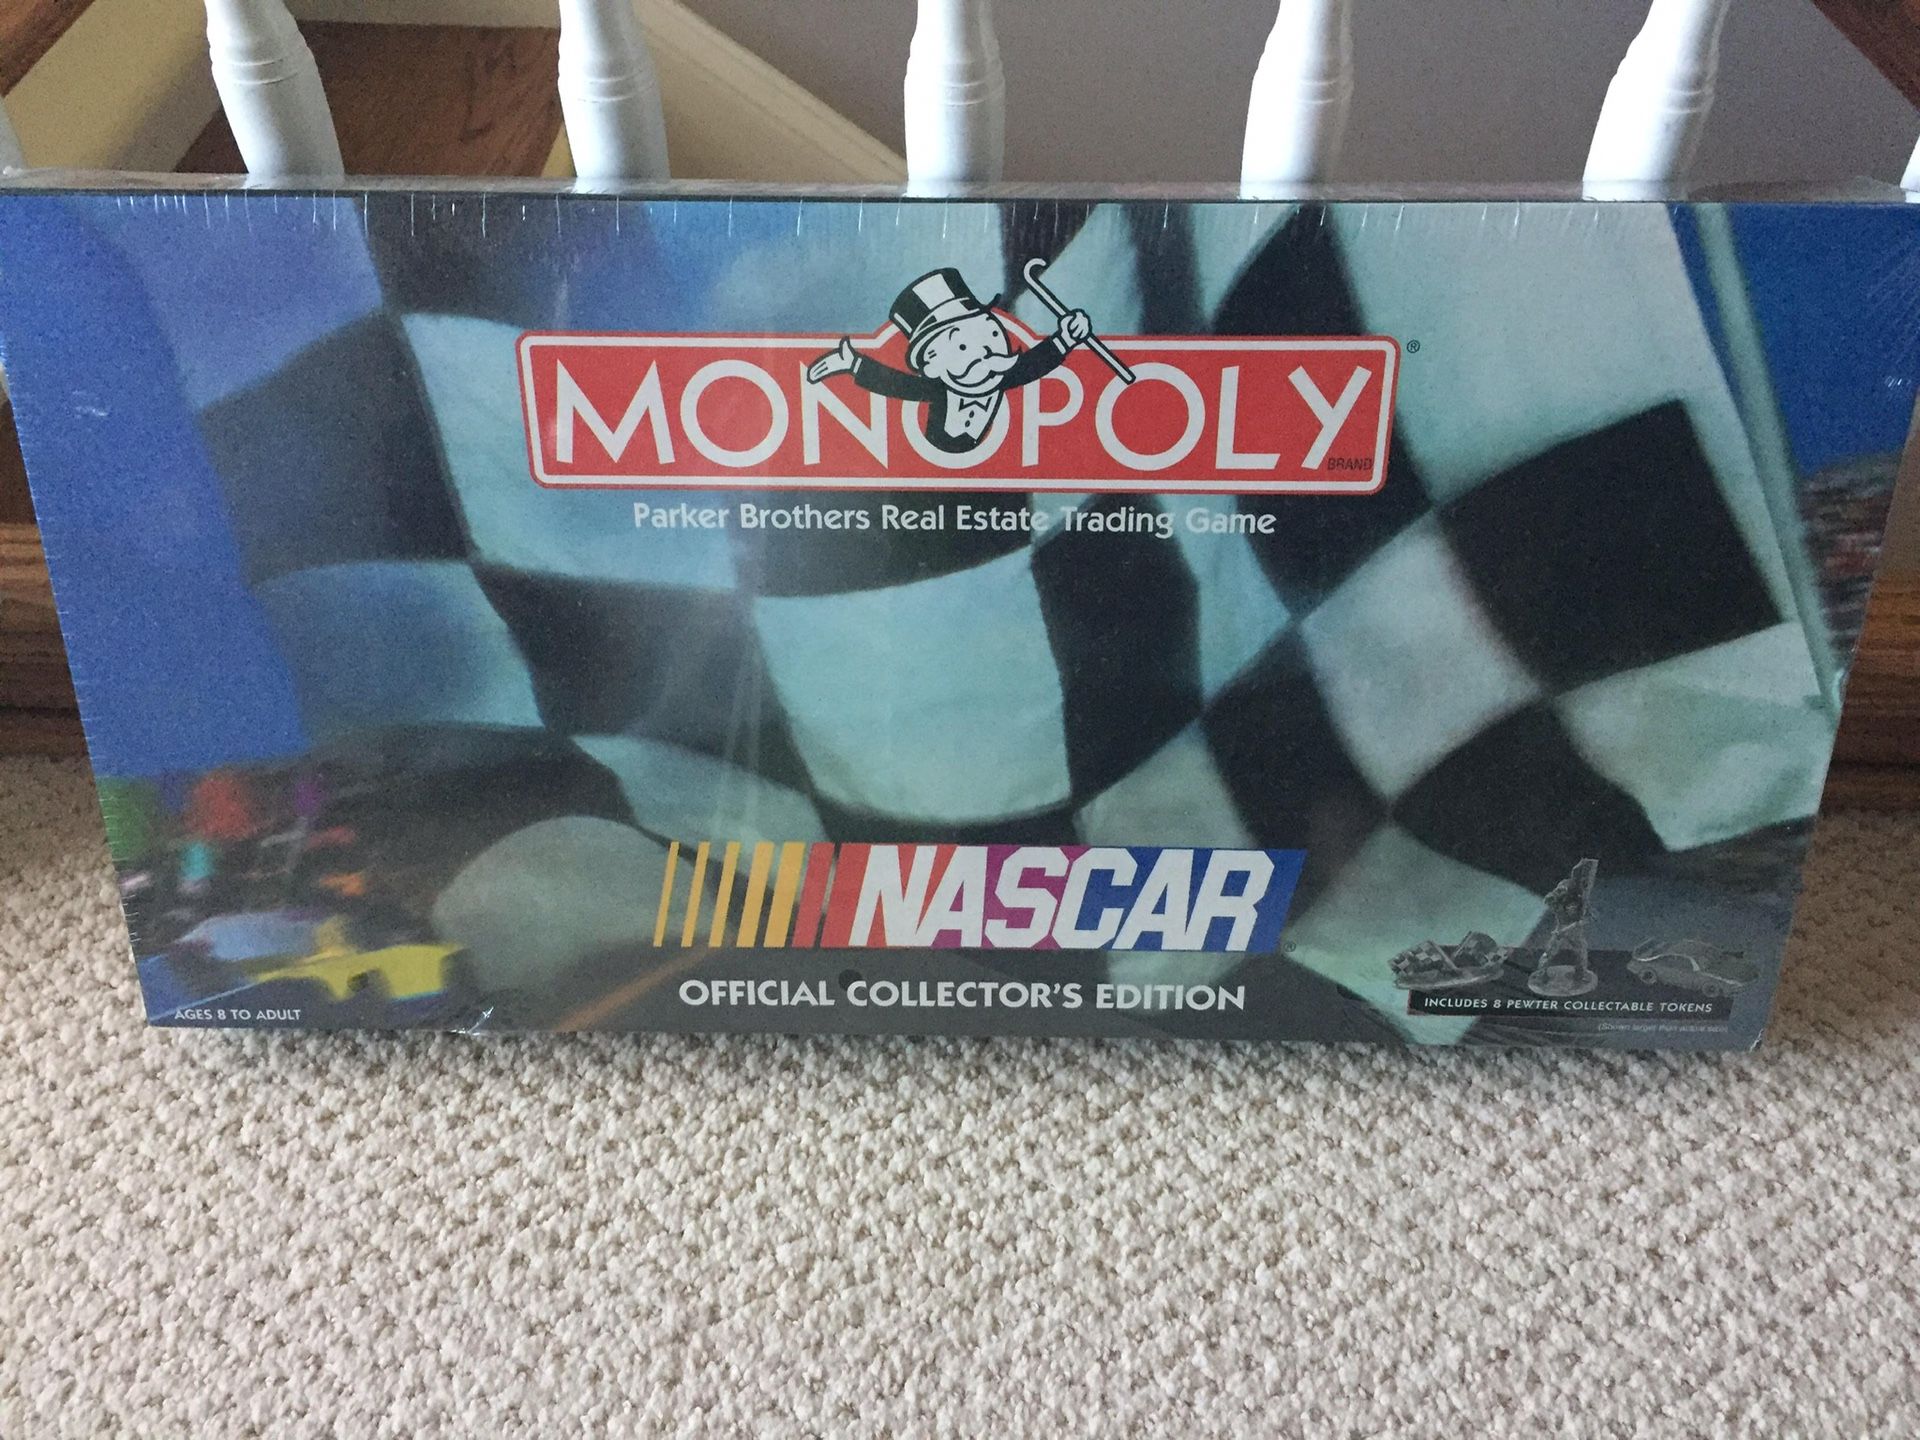 NASCAR Monopoly official collectors edition. Never opened.